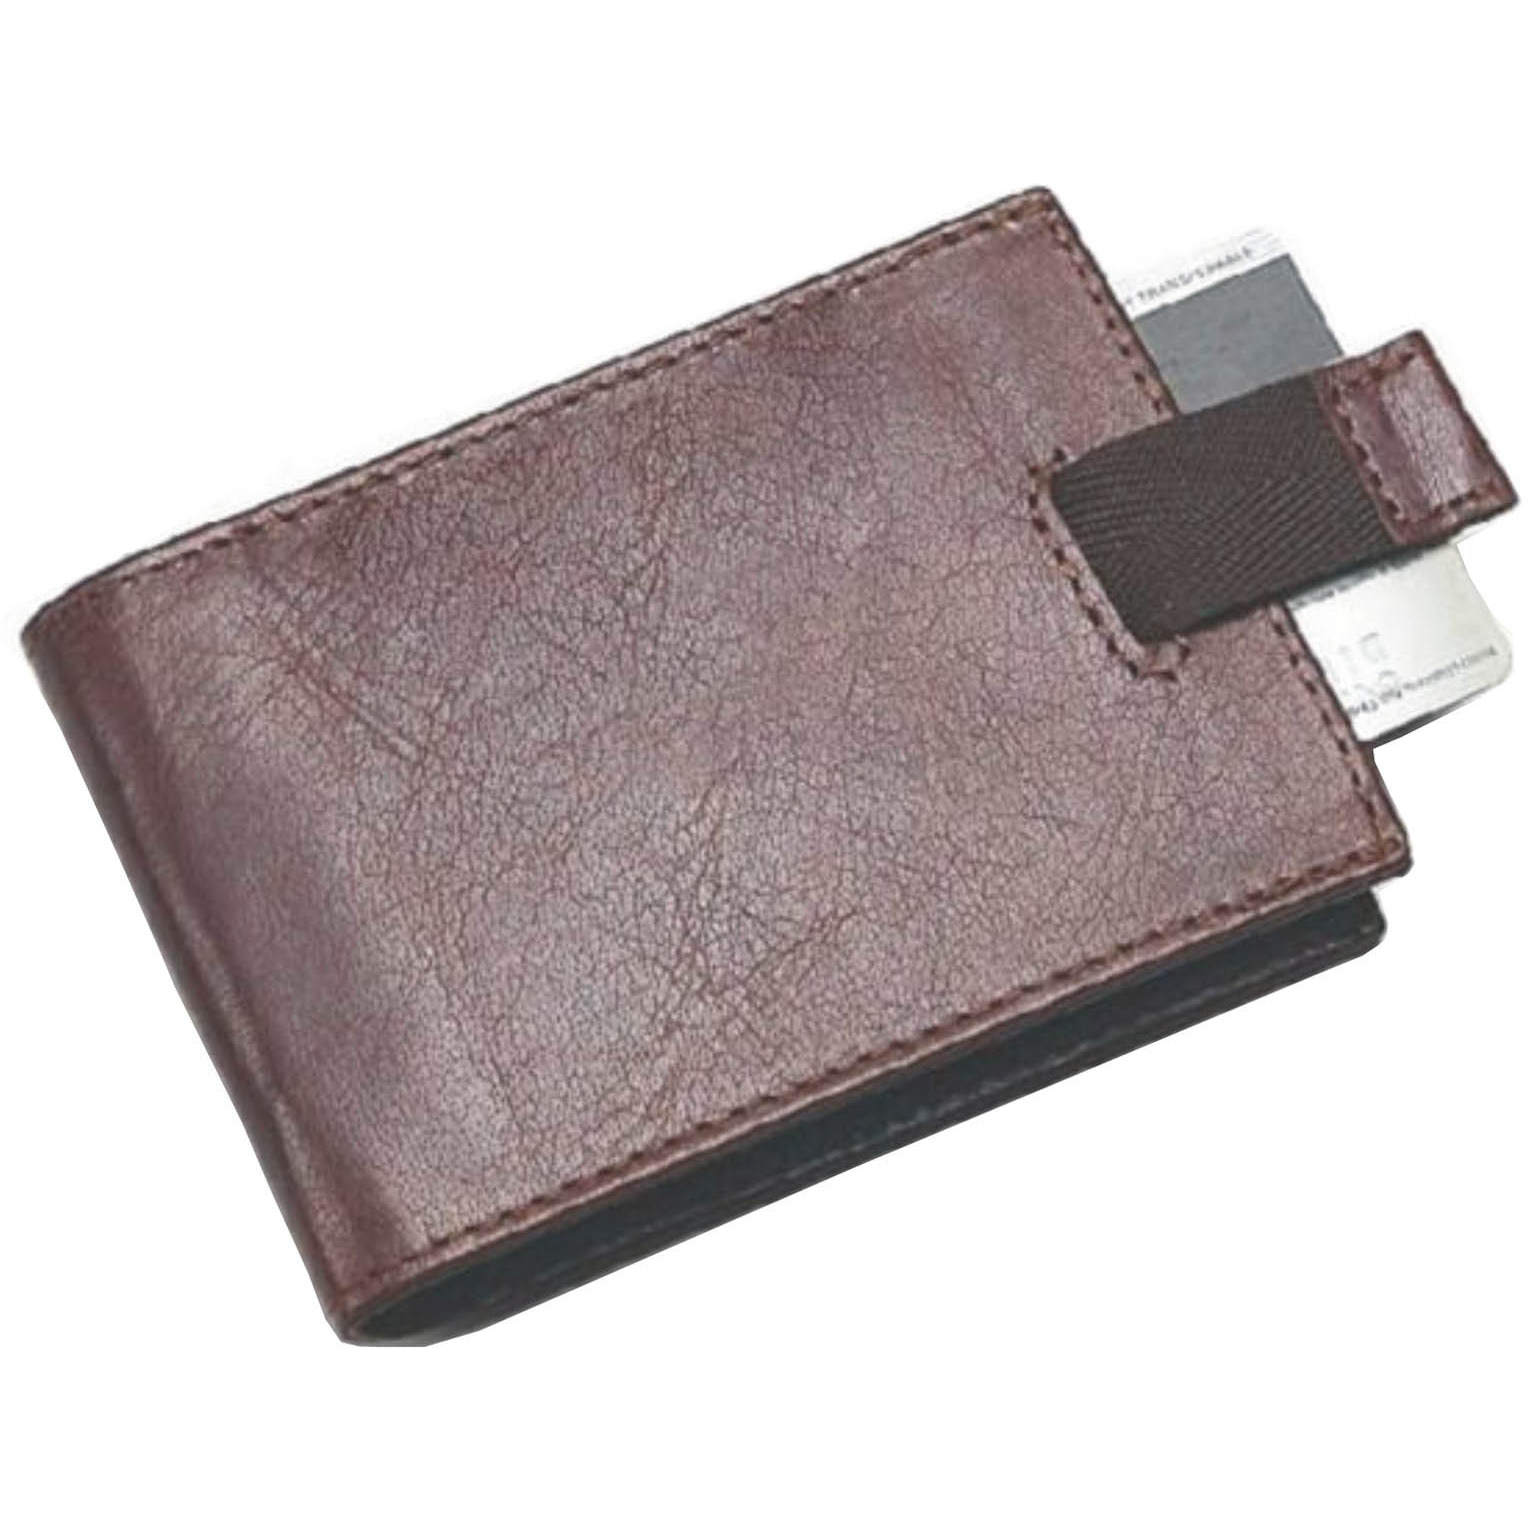 FIONA Mens Leather Bifold Wallet | Wallets For Men RFID Blocking | Genuine Leather | Extra Capacity Mens Brown Wallet |